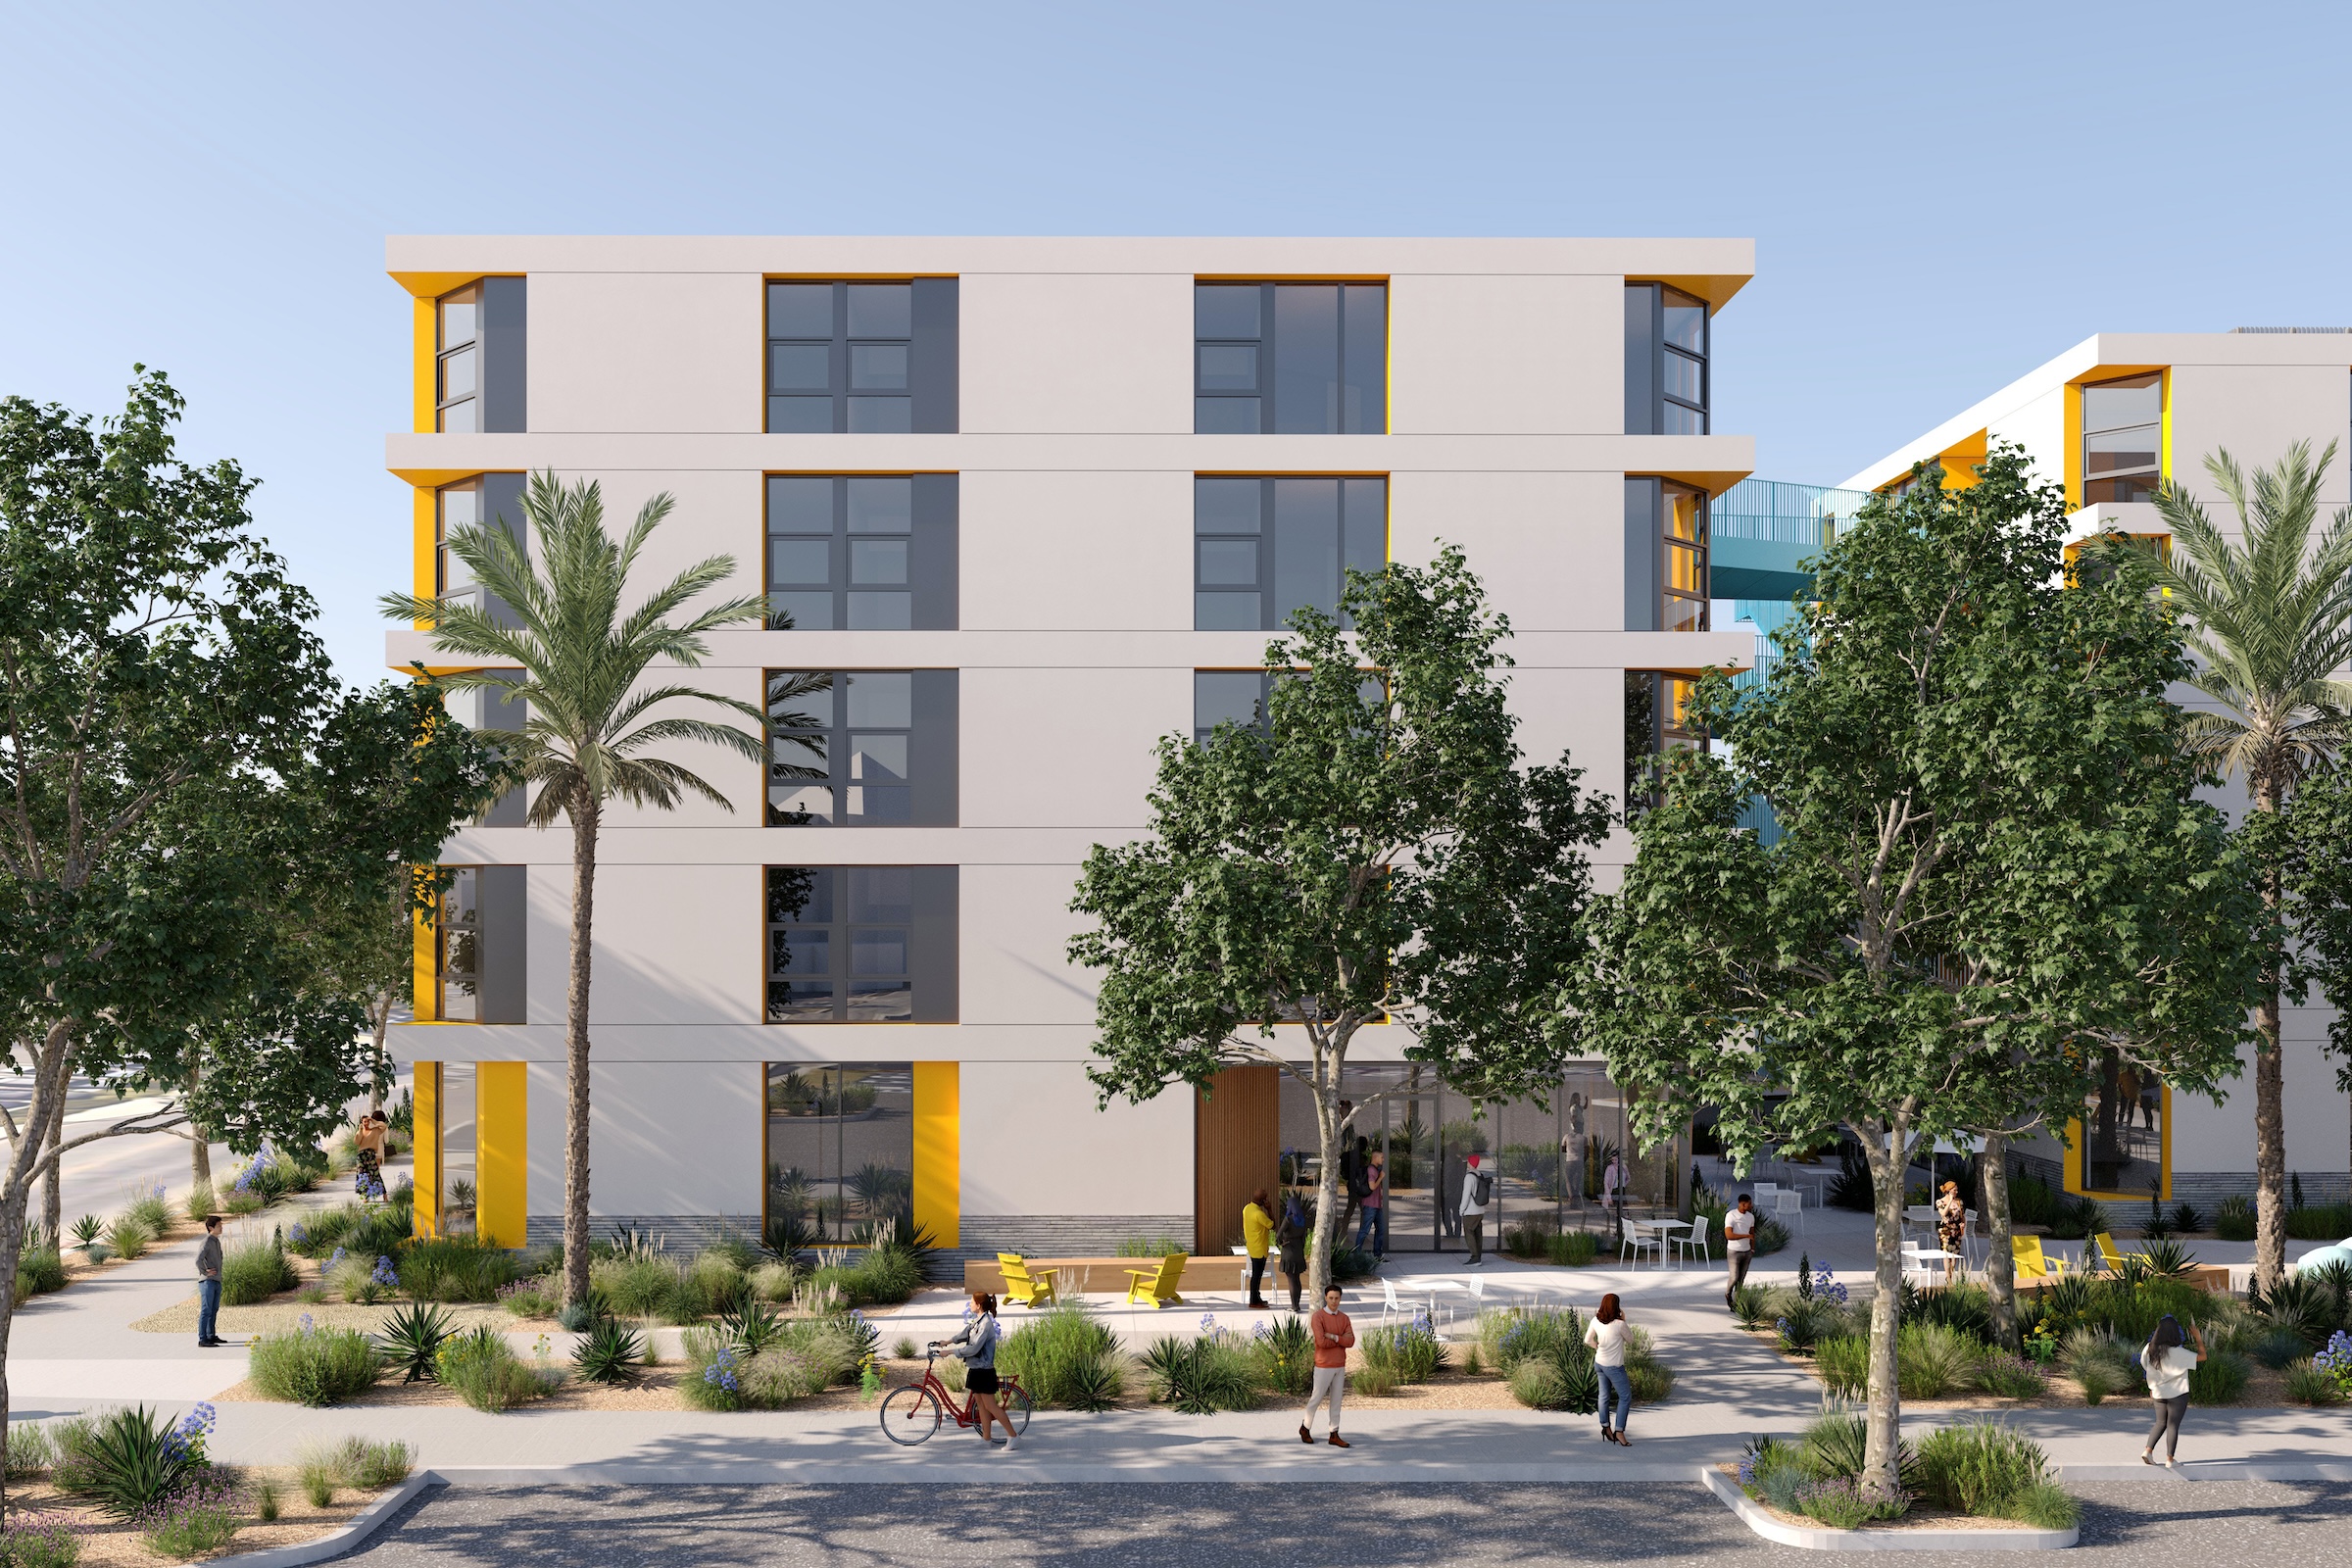 The 108,000 sf La Playa Residence Hall, funded by the State of California’s Higher Education Student Housing Grant Program, will consist of three five-story structures connected by bridges.